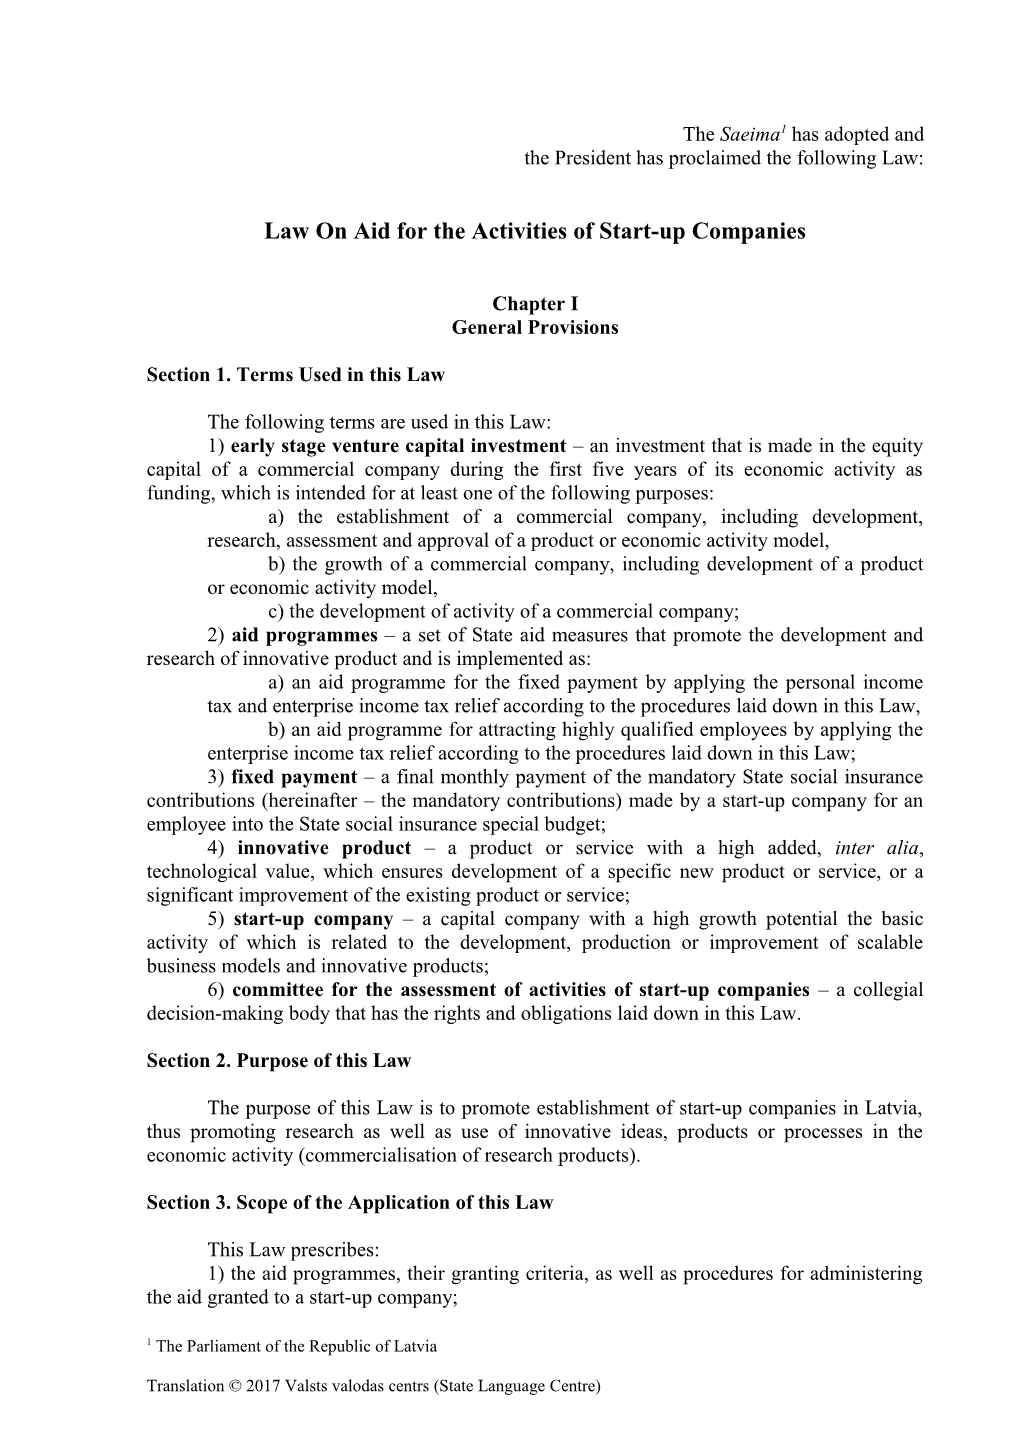 Law on Aid for the Activities of Start-Up Companies